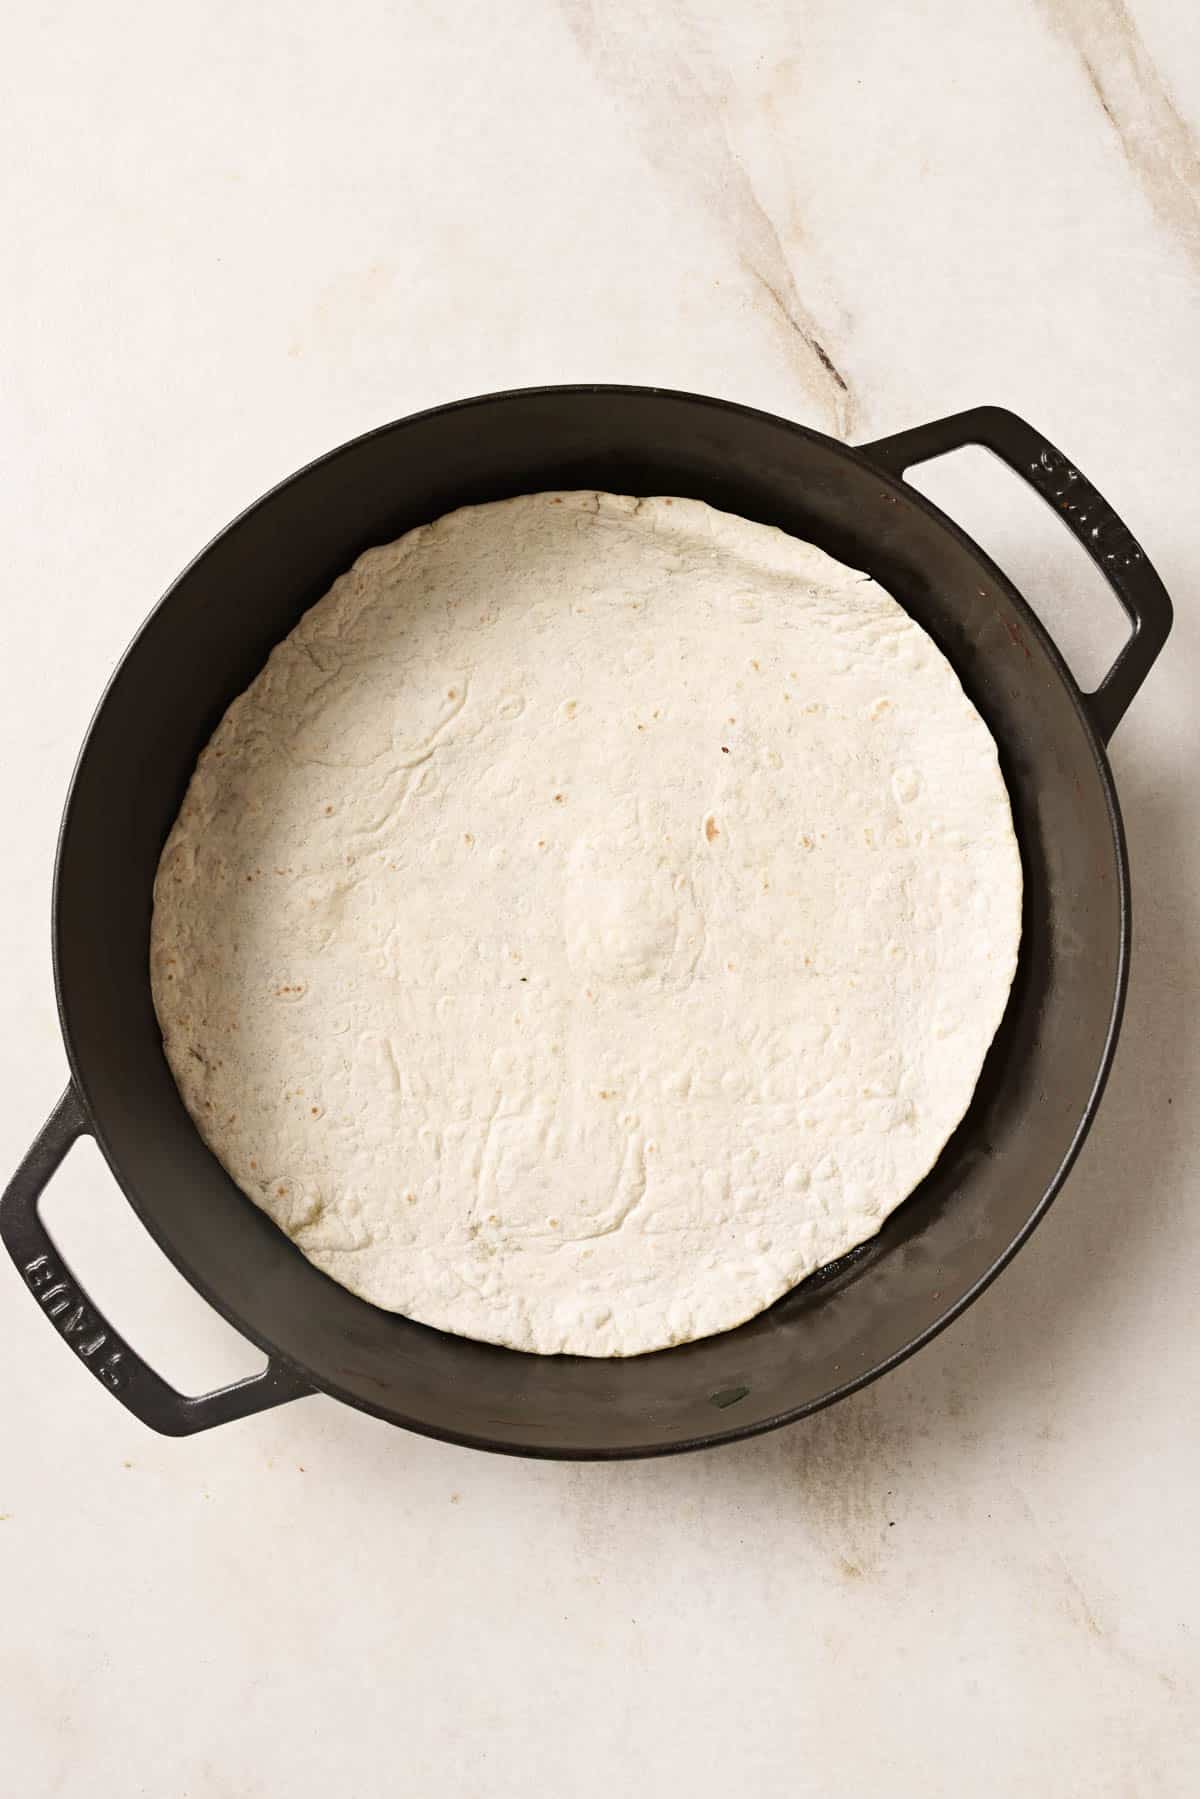 A tortilla in a cast iron pan on a white surface.